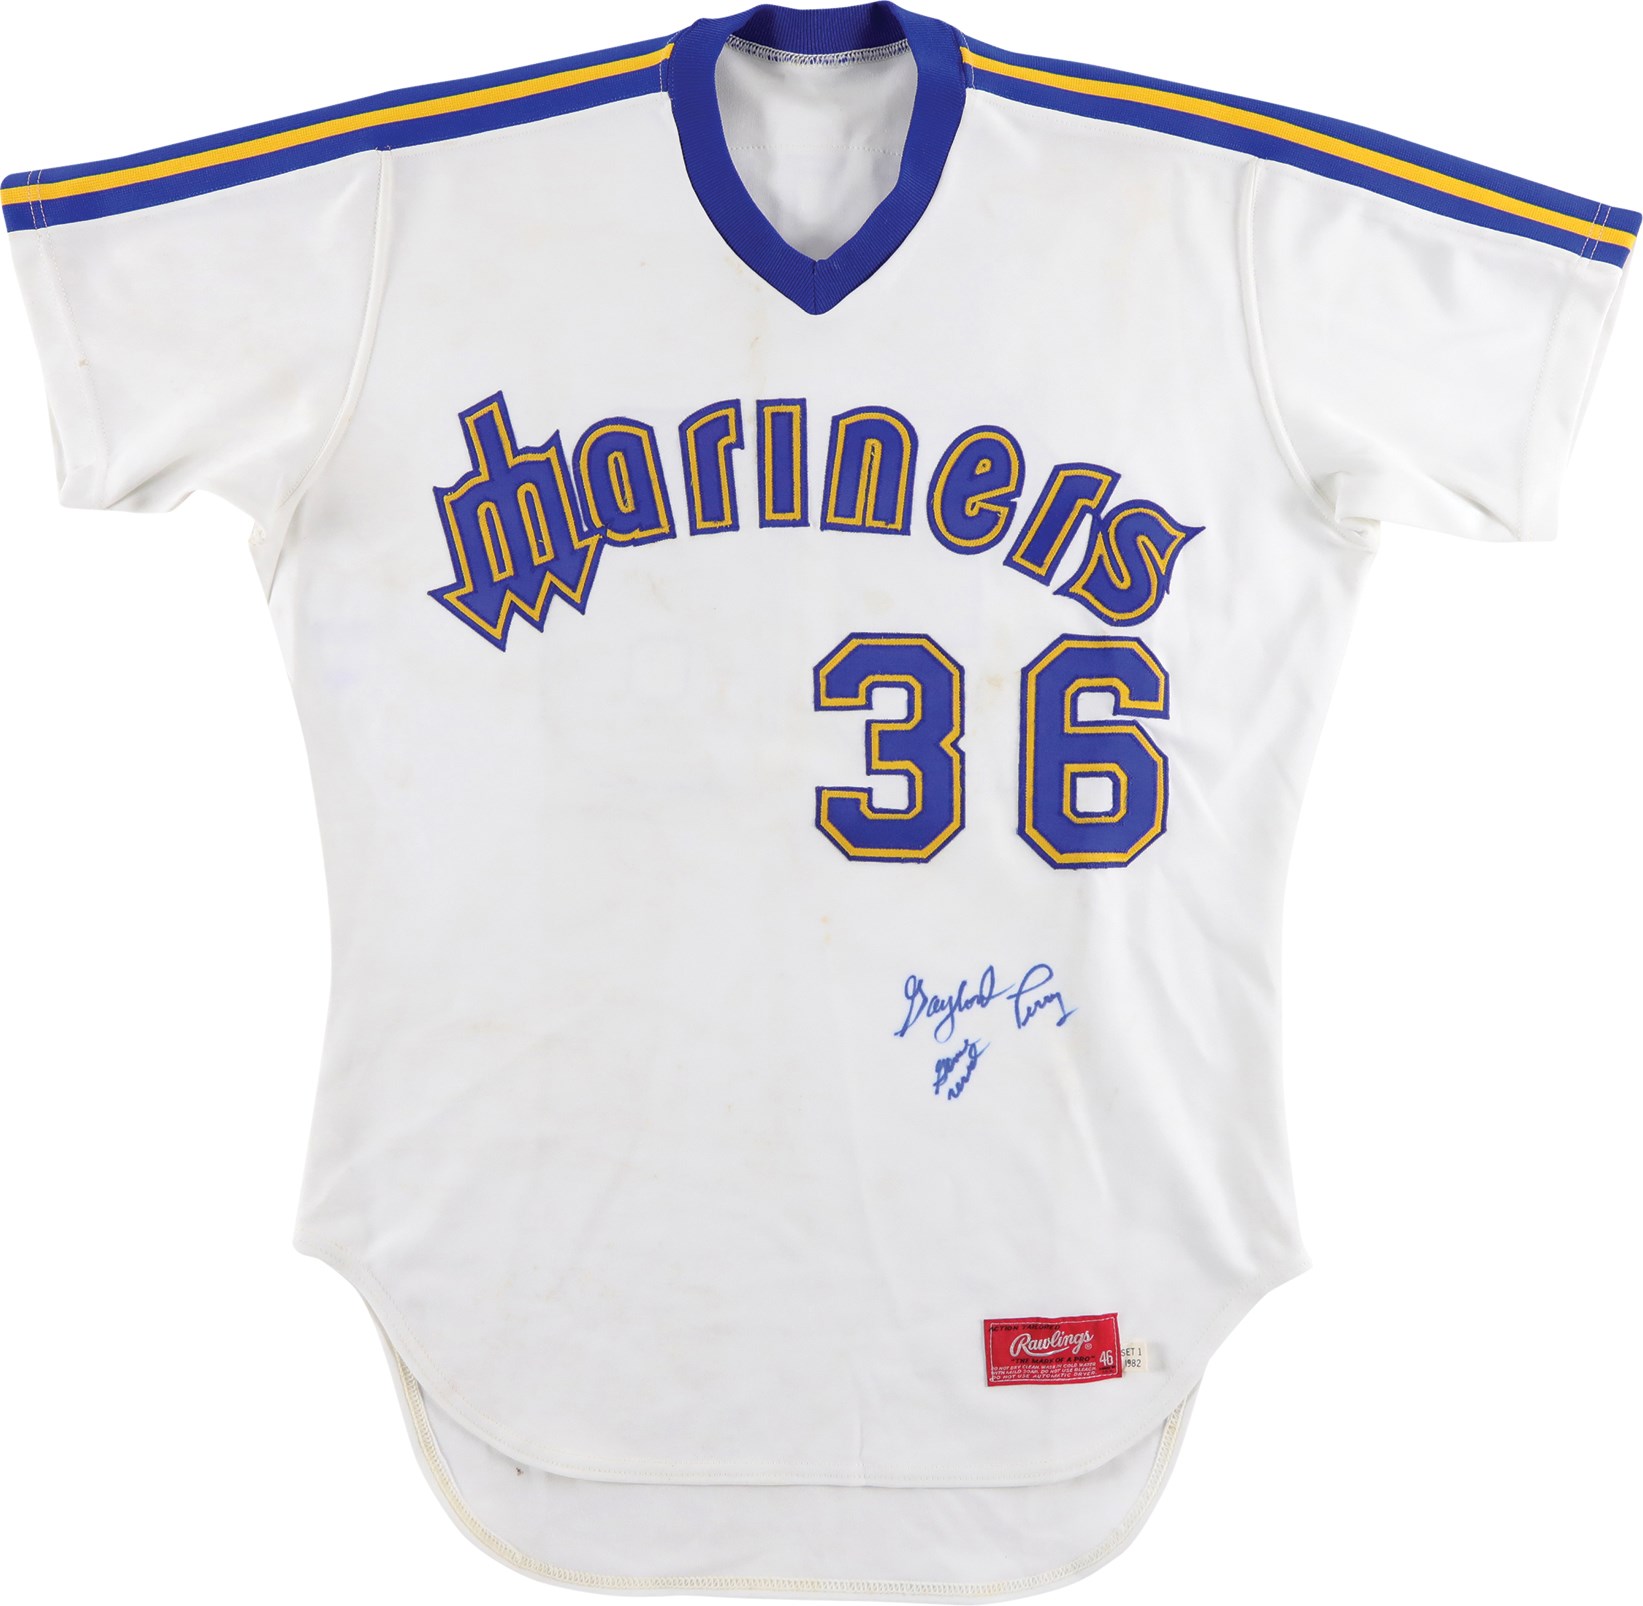 Baseball Equipment - 1982 Gaylord Perry Seattle Mariners Game Worn Jersey (MEARS A10)